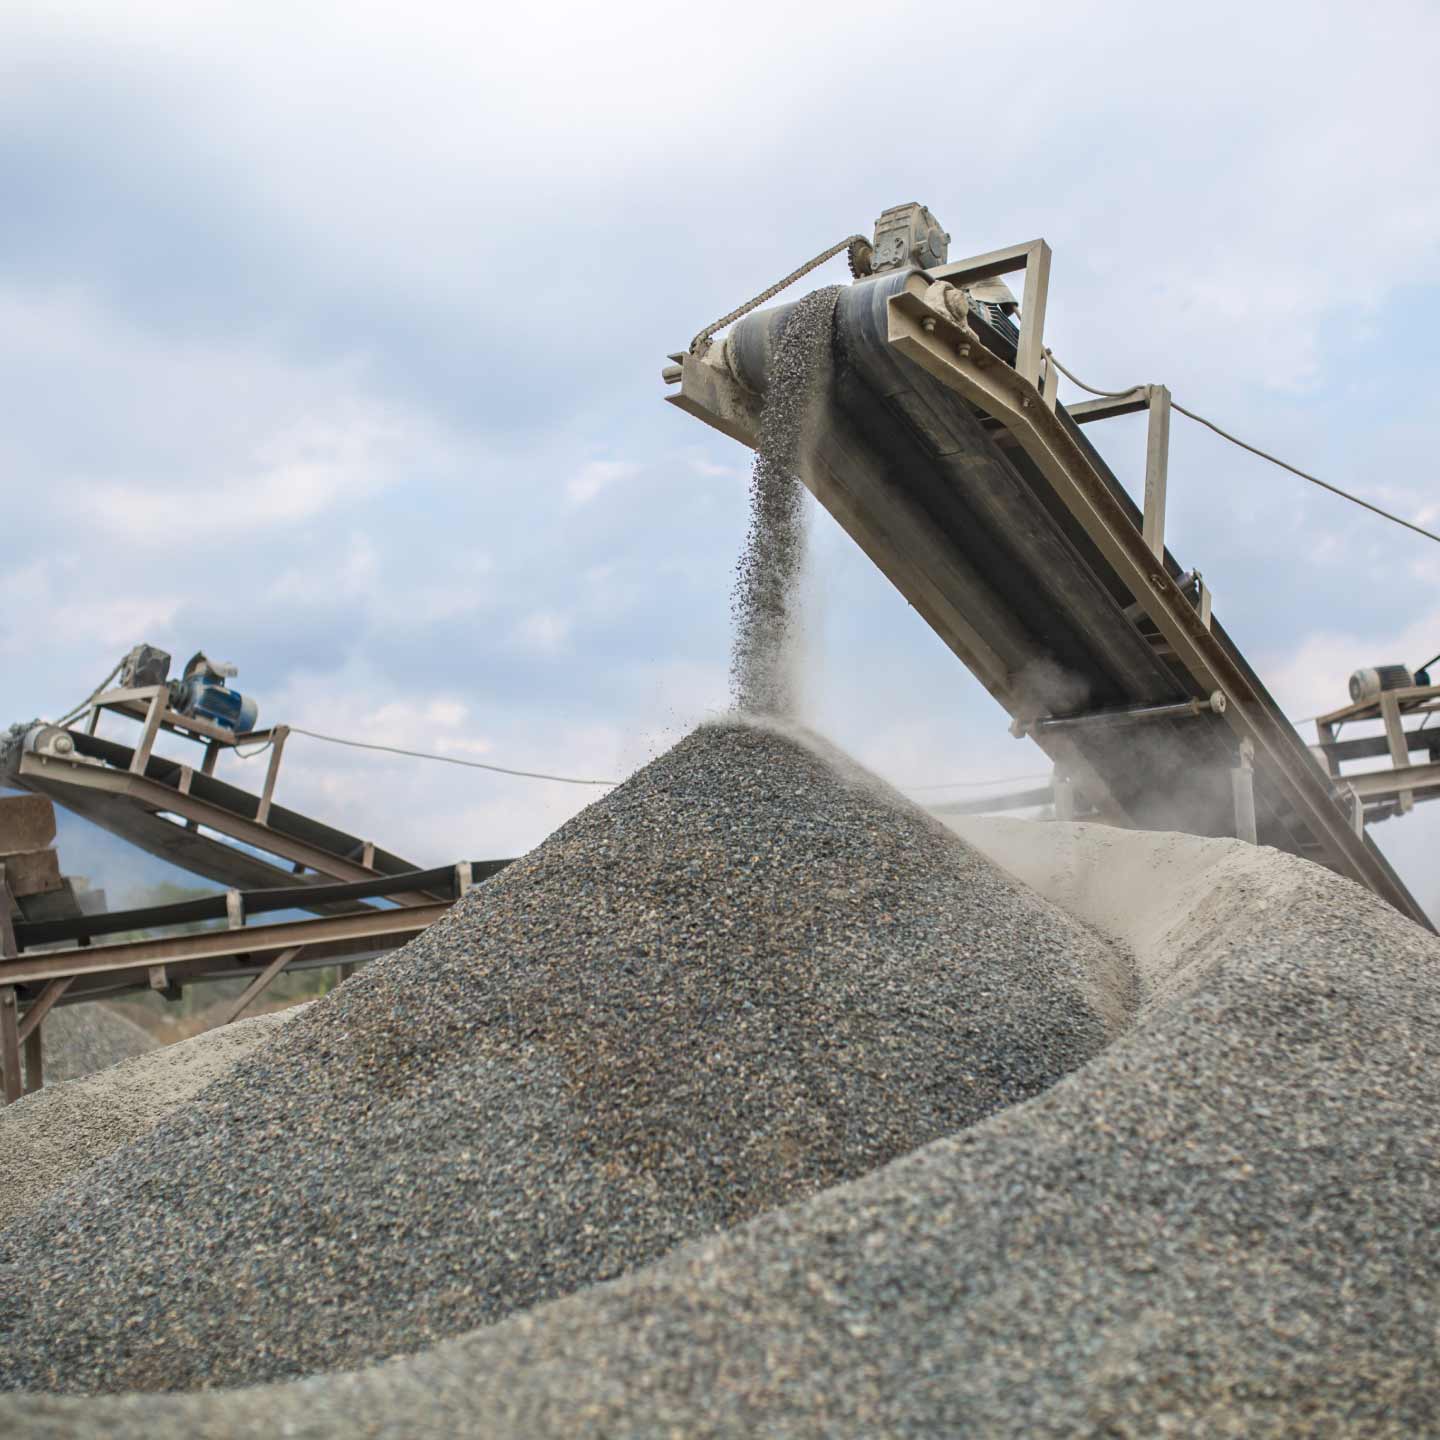 A conveyor belt is being used to sift building materials.